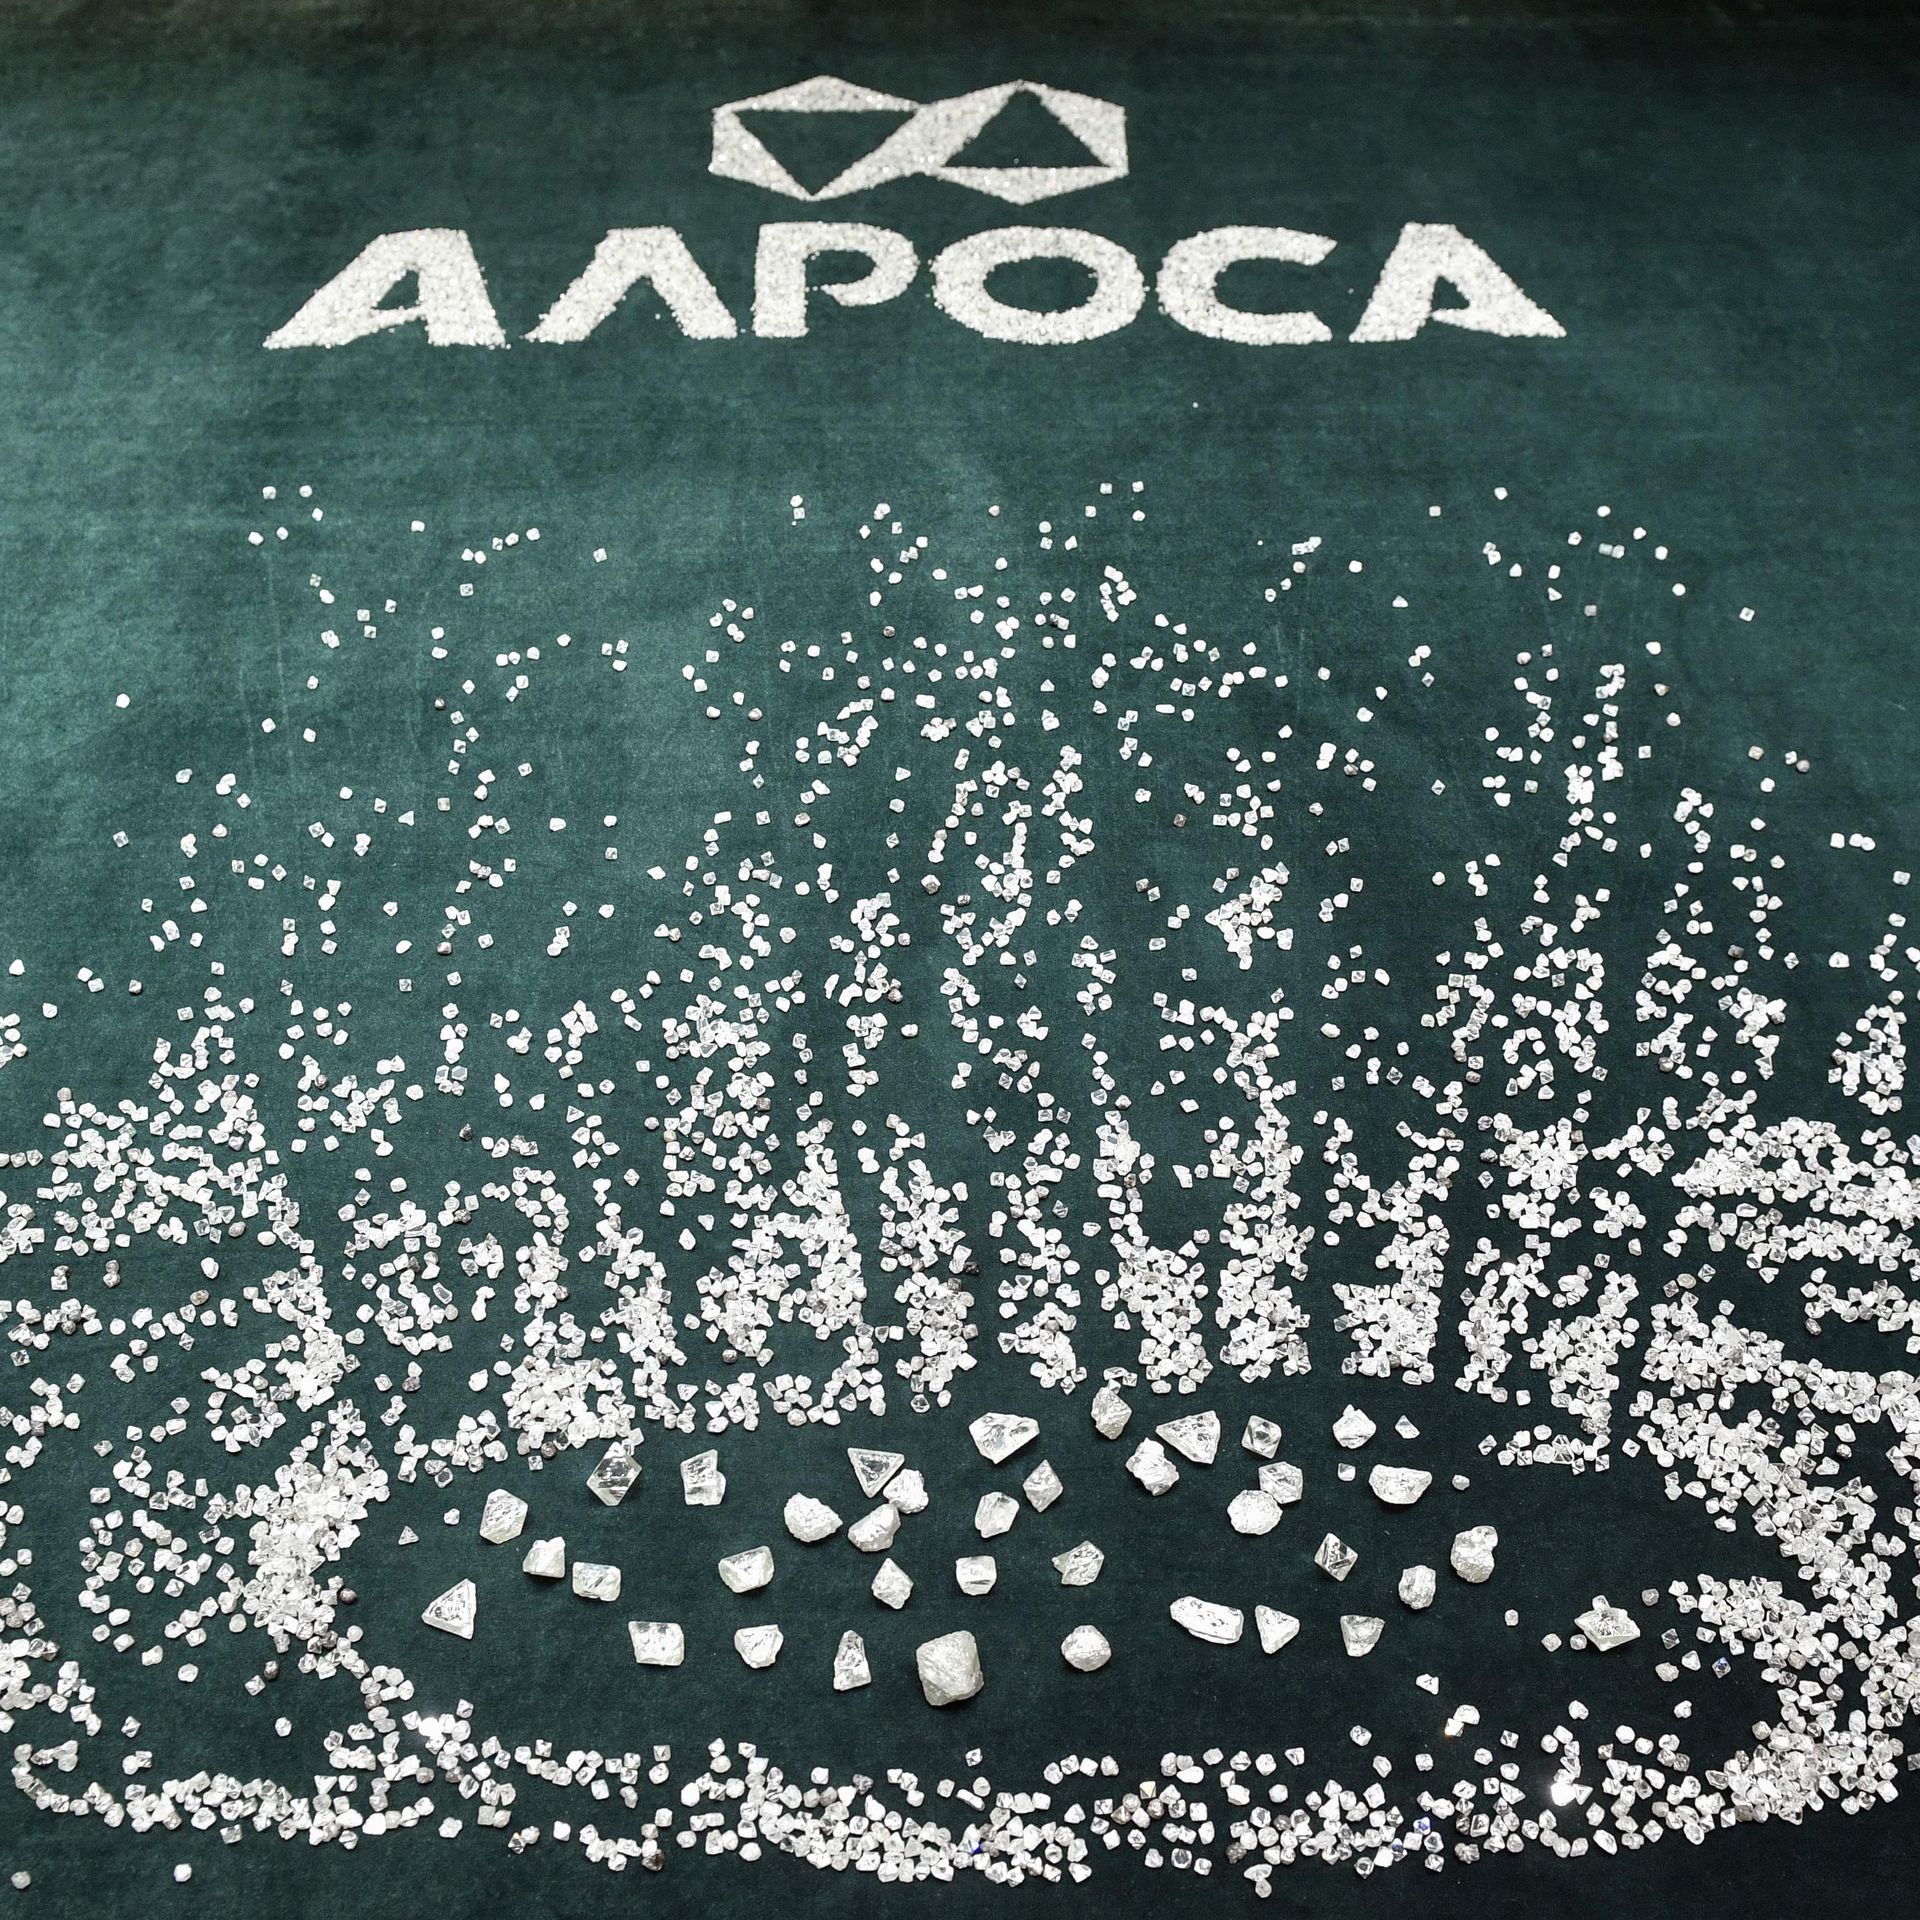 Diamonds scattered on a table under the Alrosa logo